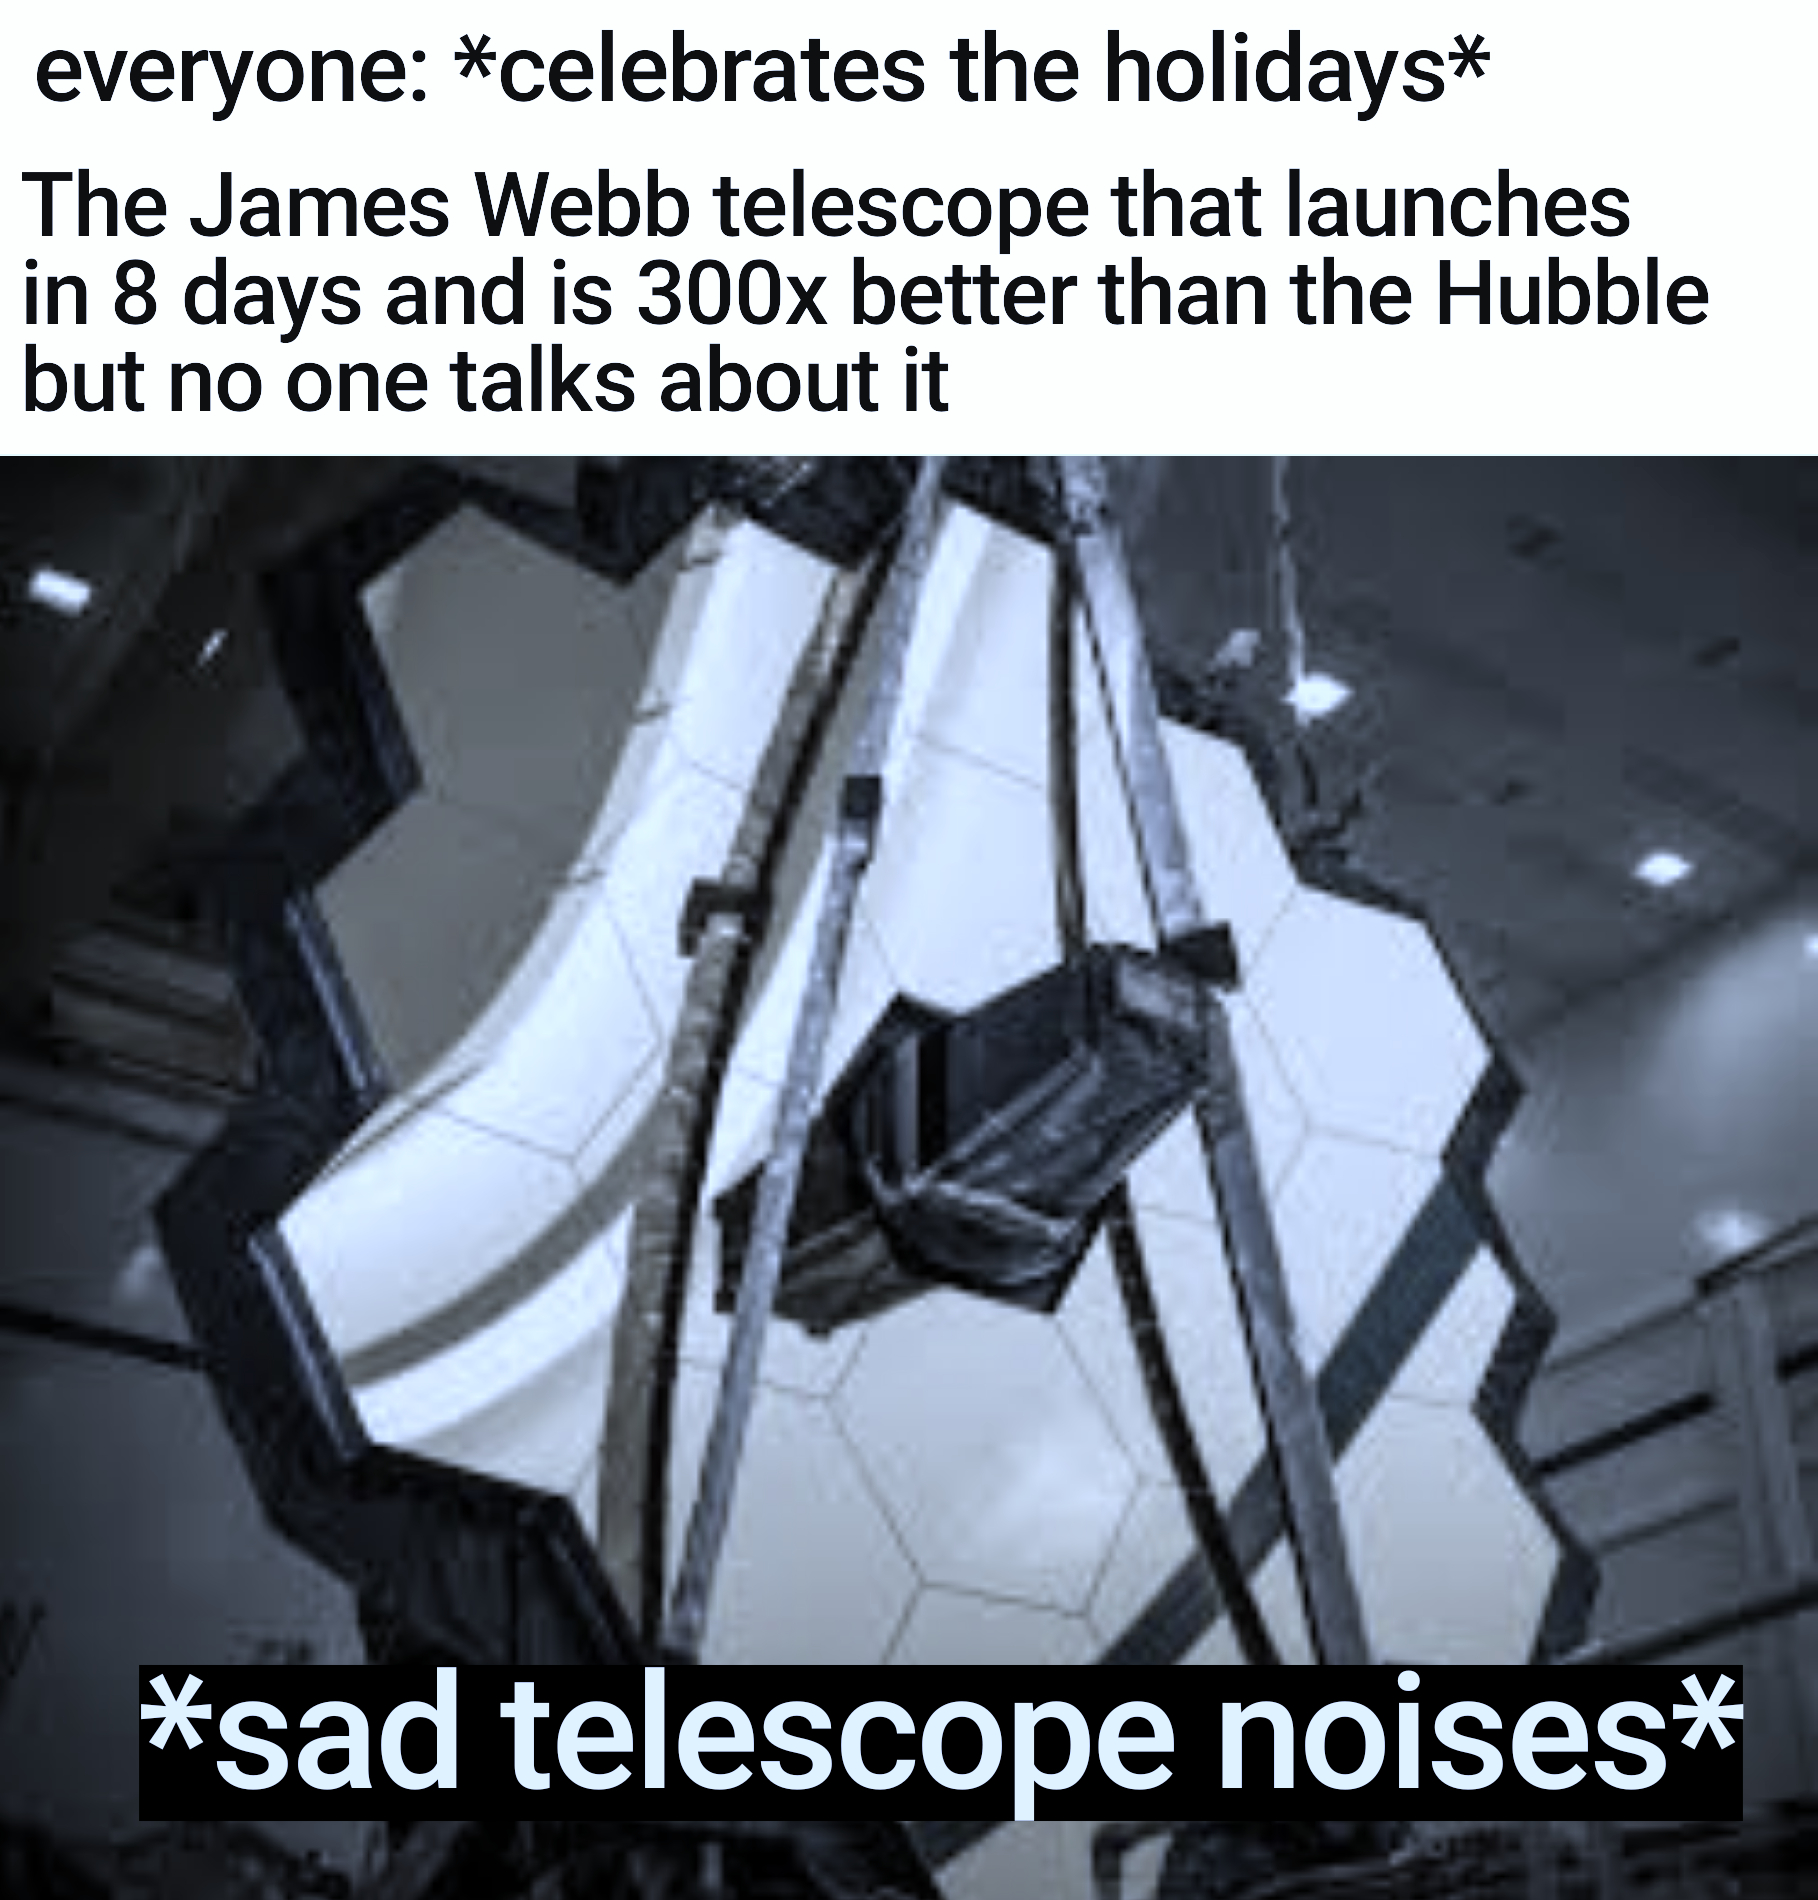 james webb - everyone celebrates the holidays The James Webb telescope that launches in 8 days and is 300x better than the Hubble but no one talks about it sad telescope noises